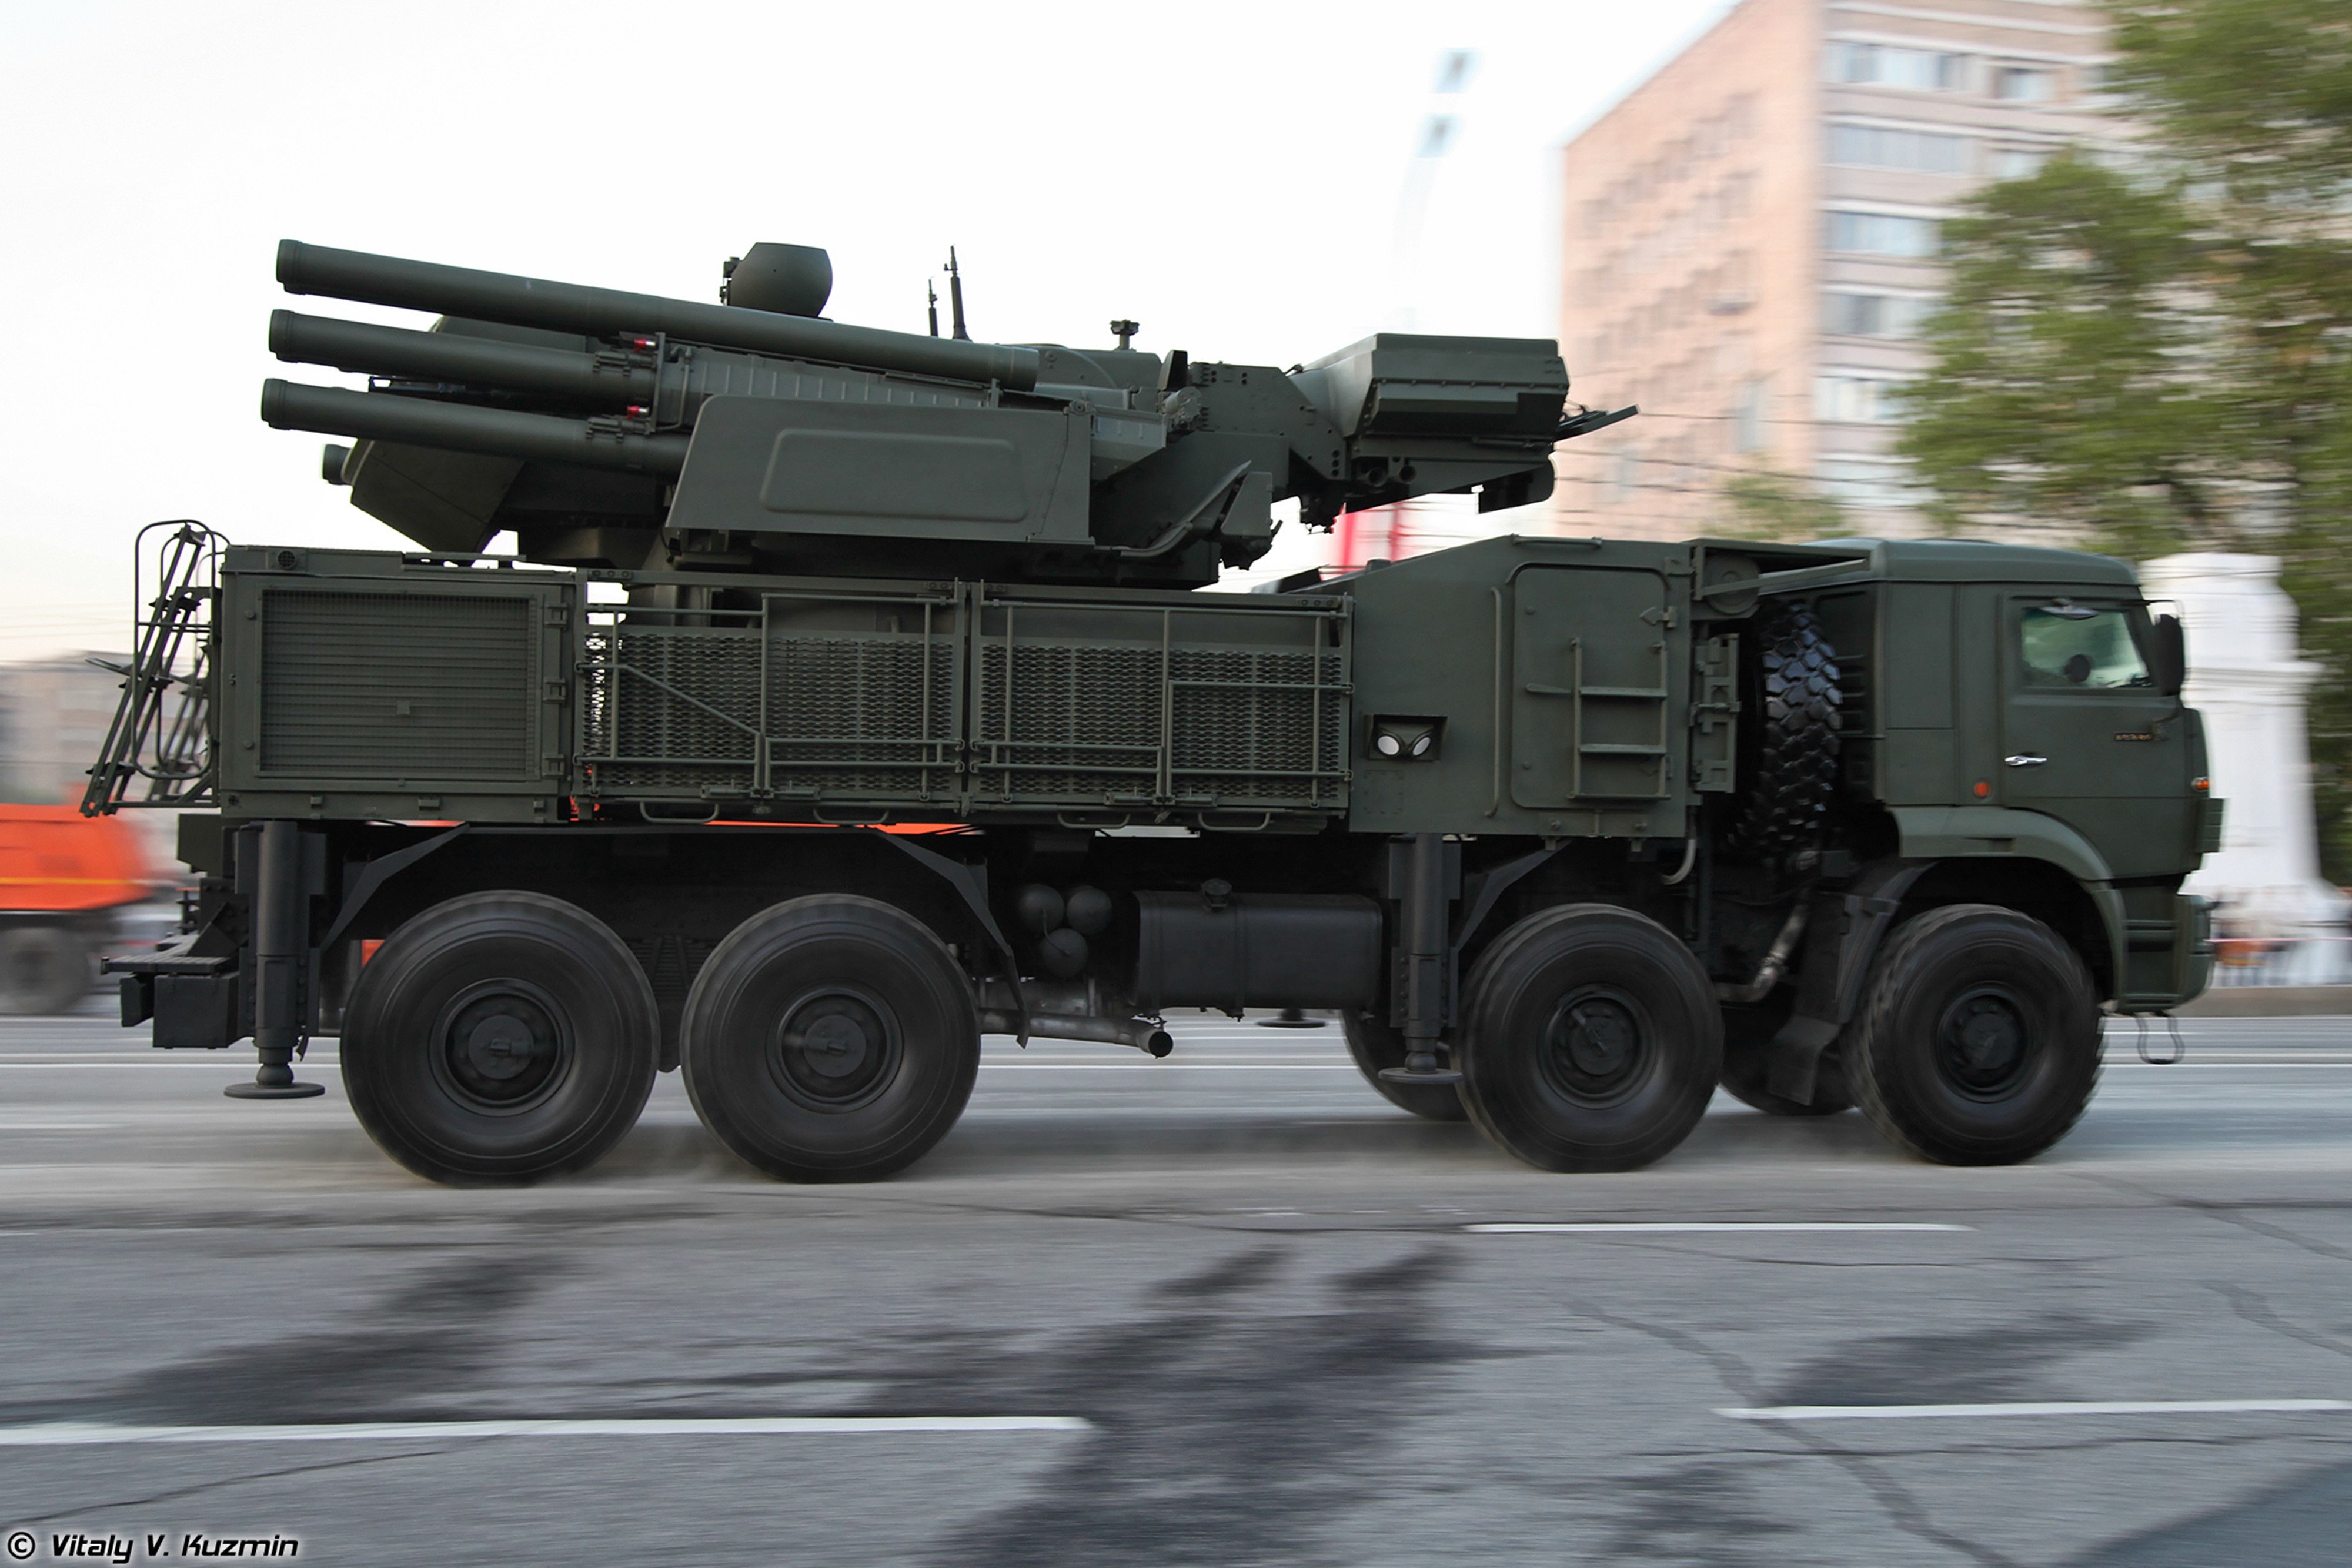 april 29th, Rehearsal, Of, 2014, Victory, Day, Parade, In, Moscow, Russia, Red, Star, Russian, Military, Army, 96k6, Pantsir s1, Telar, Anti aircraft, Missile, Kamaz, Truck, 2, 4000x2667 Wallpaper